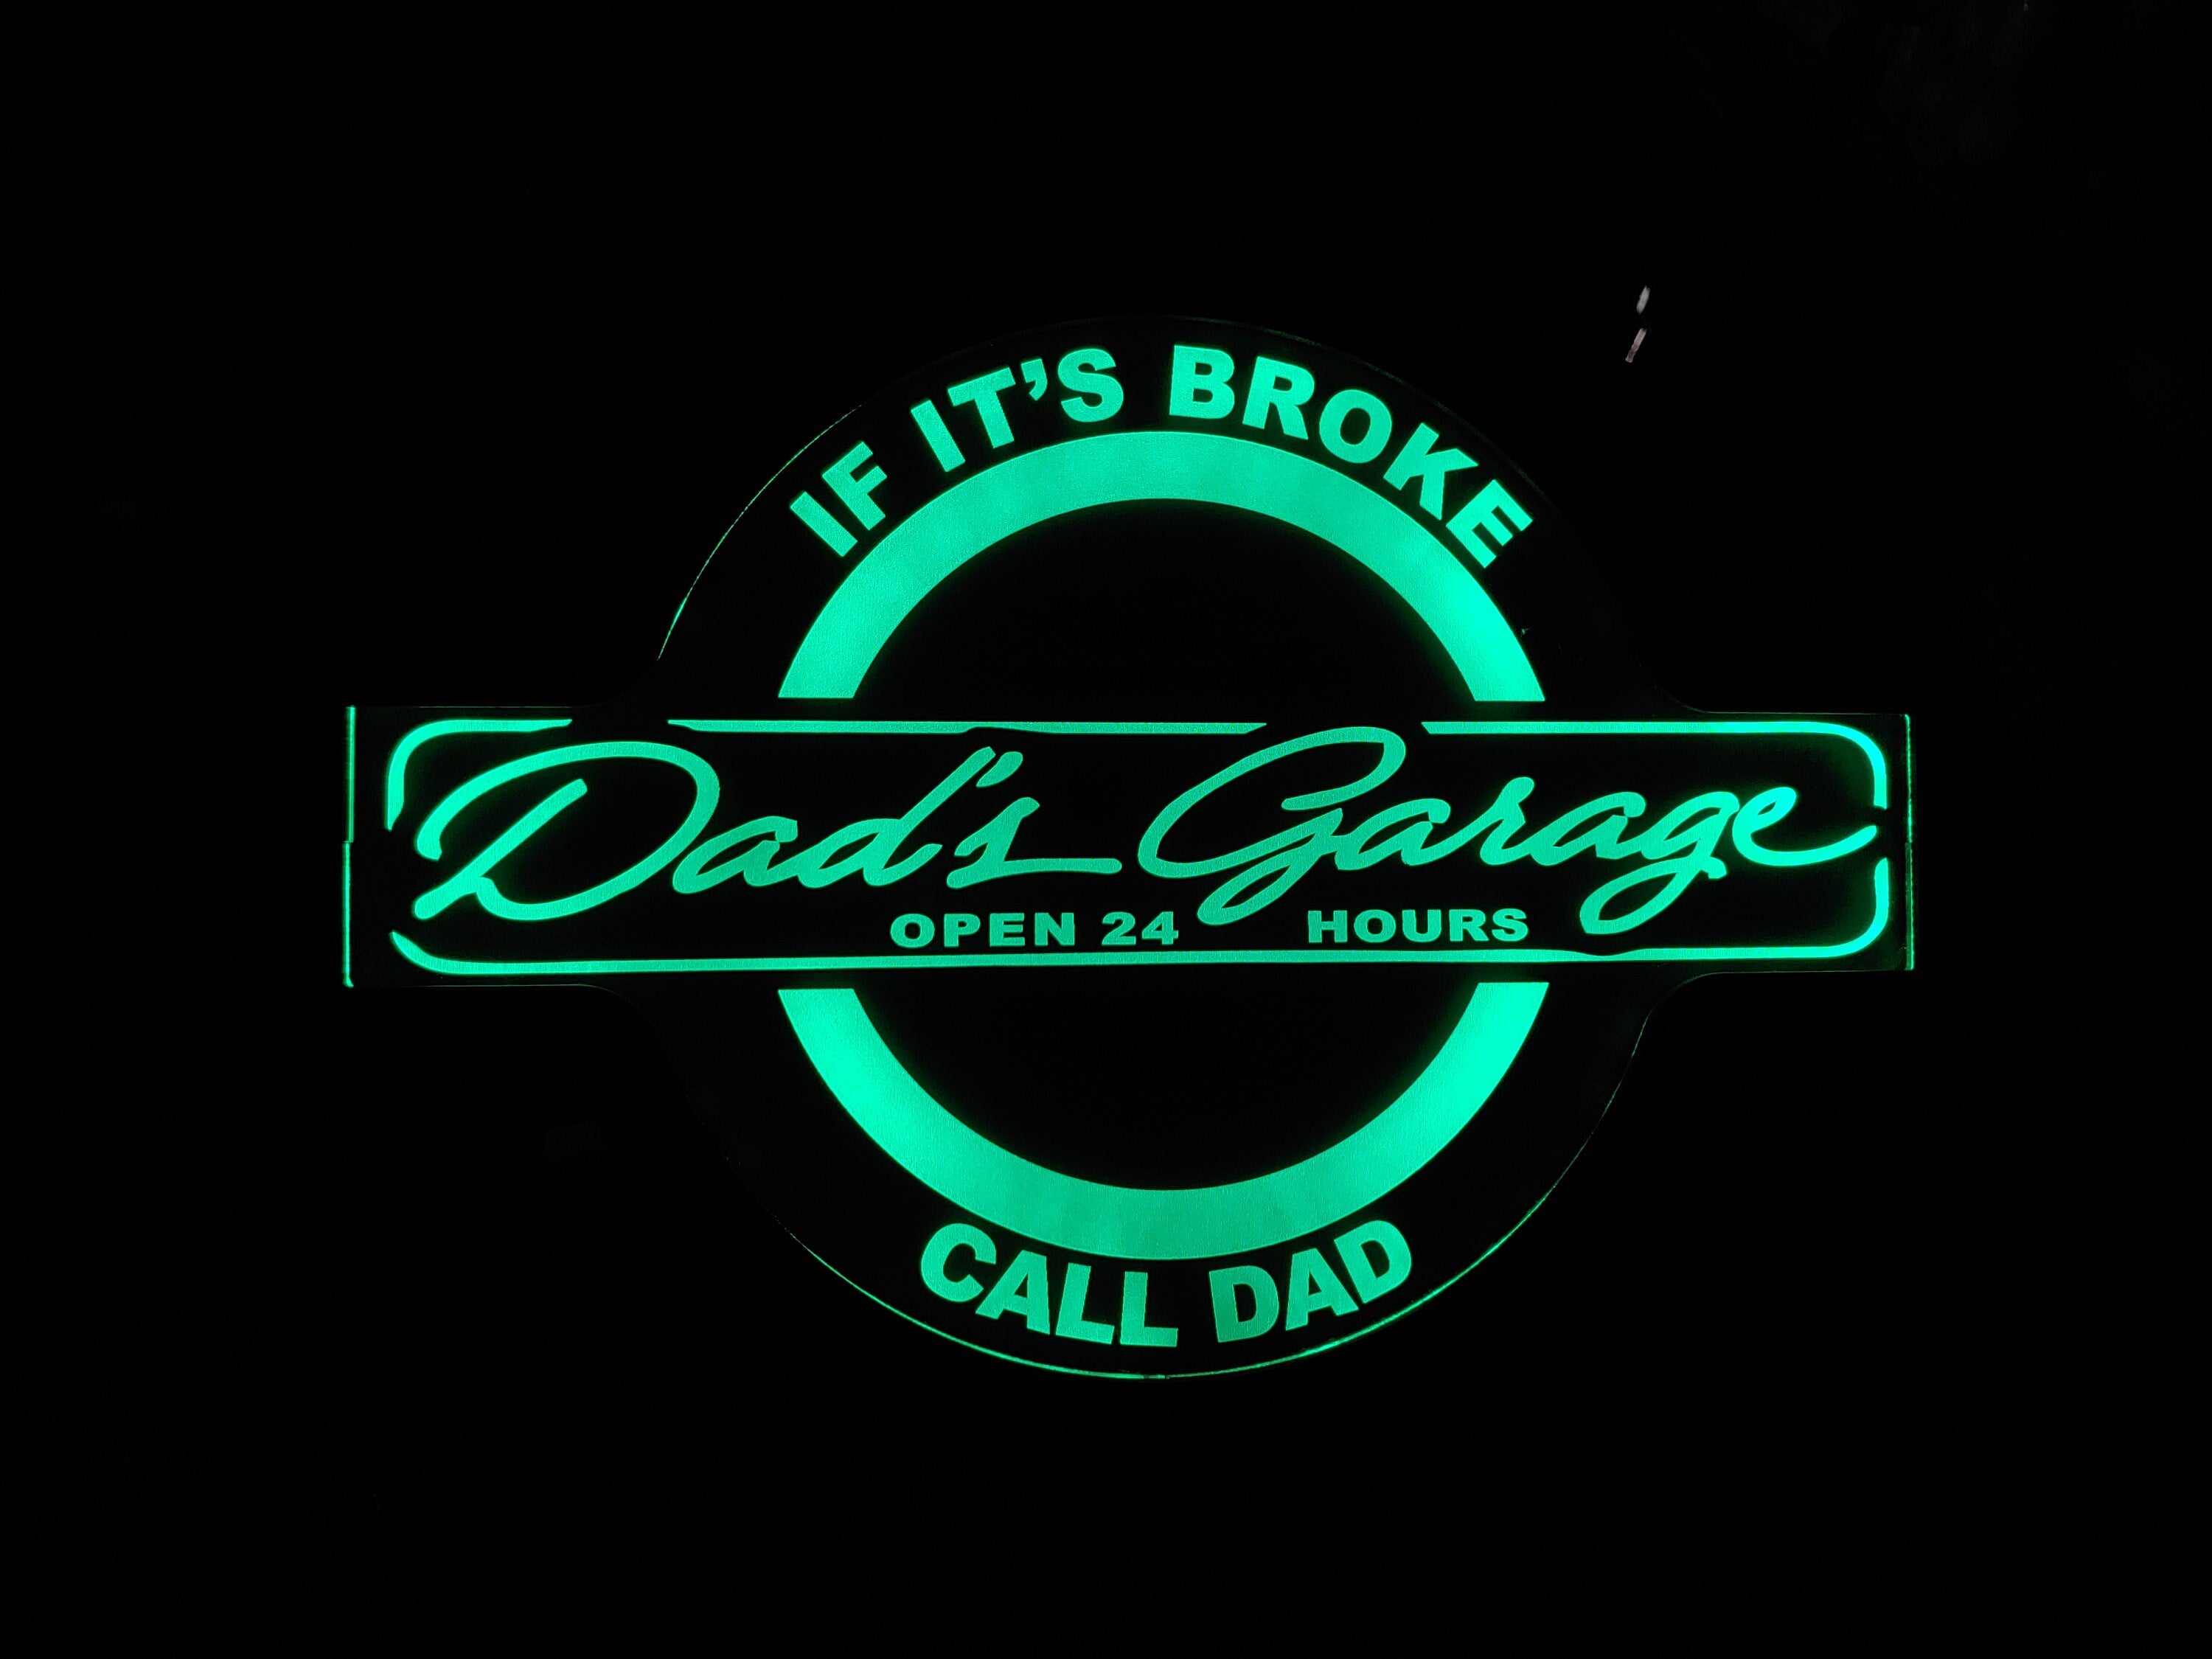 Dad's Garage LED Wall Light Neon-Like - Color Changing - Free Shipping